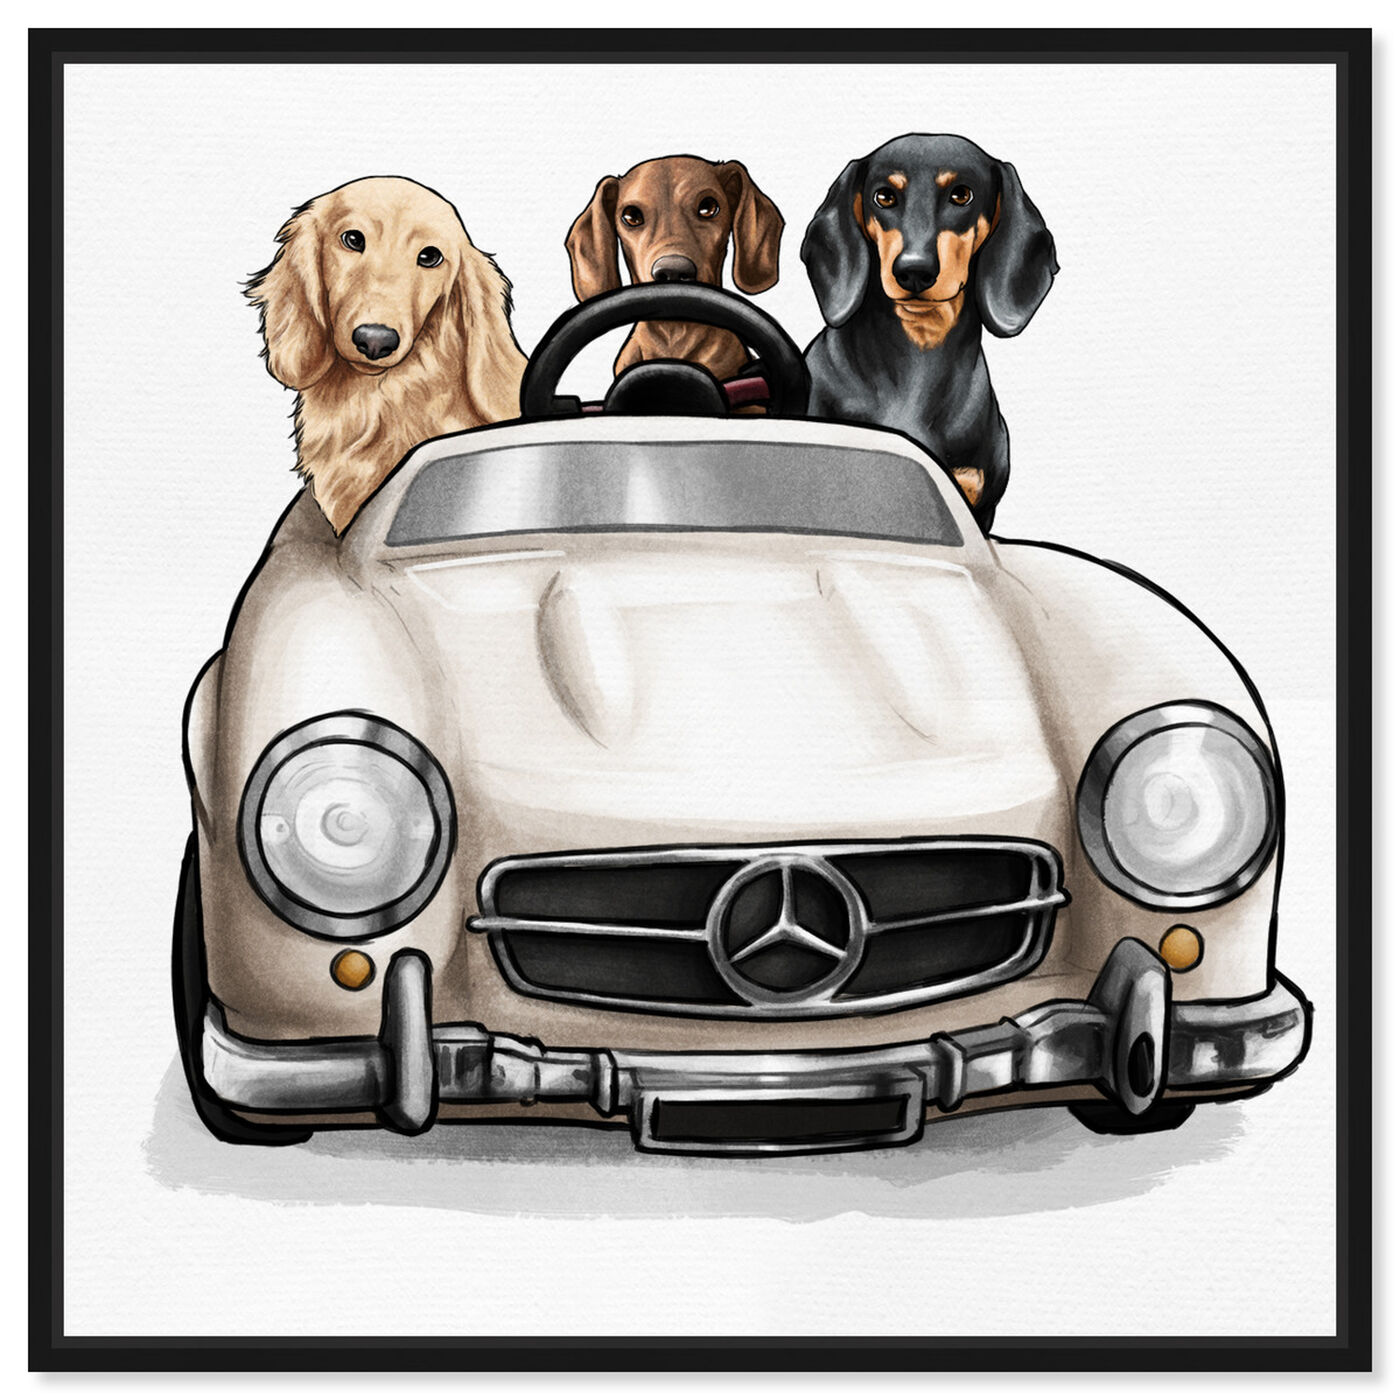 Front view of Strolling in Style dachshunds featuring animals and dogs and puppies art.